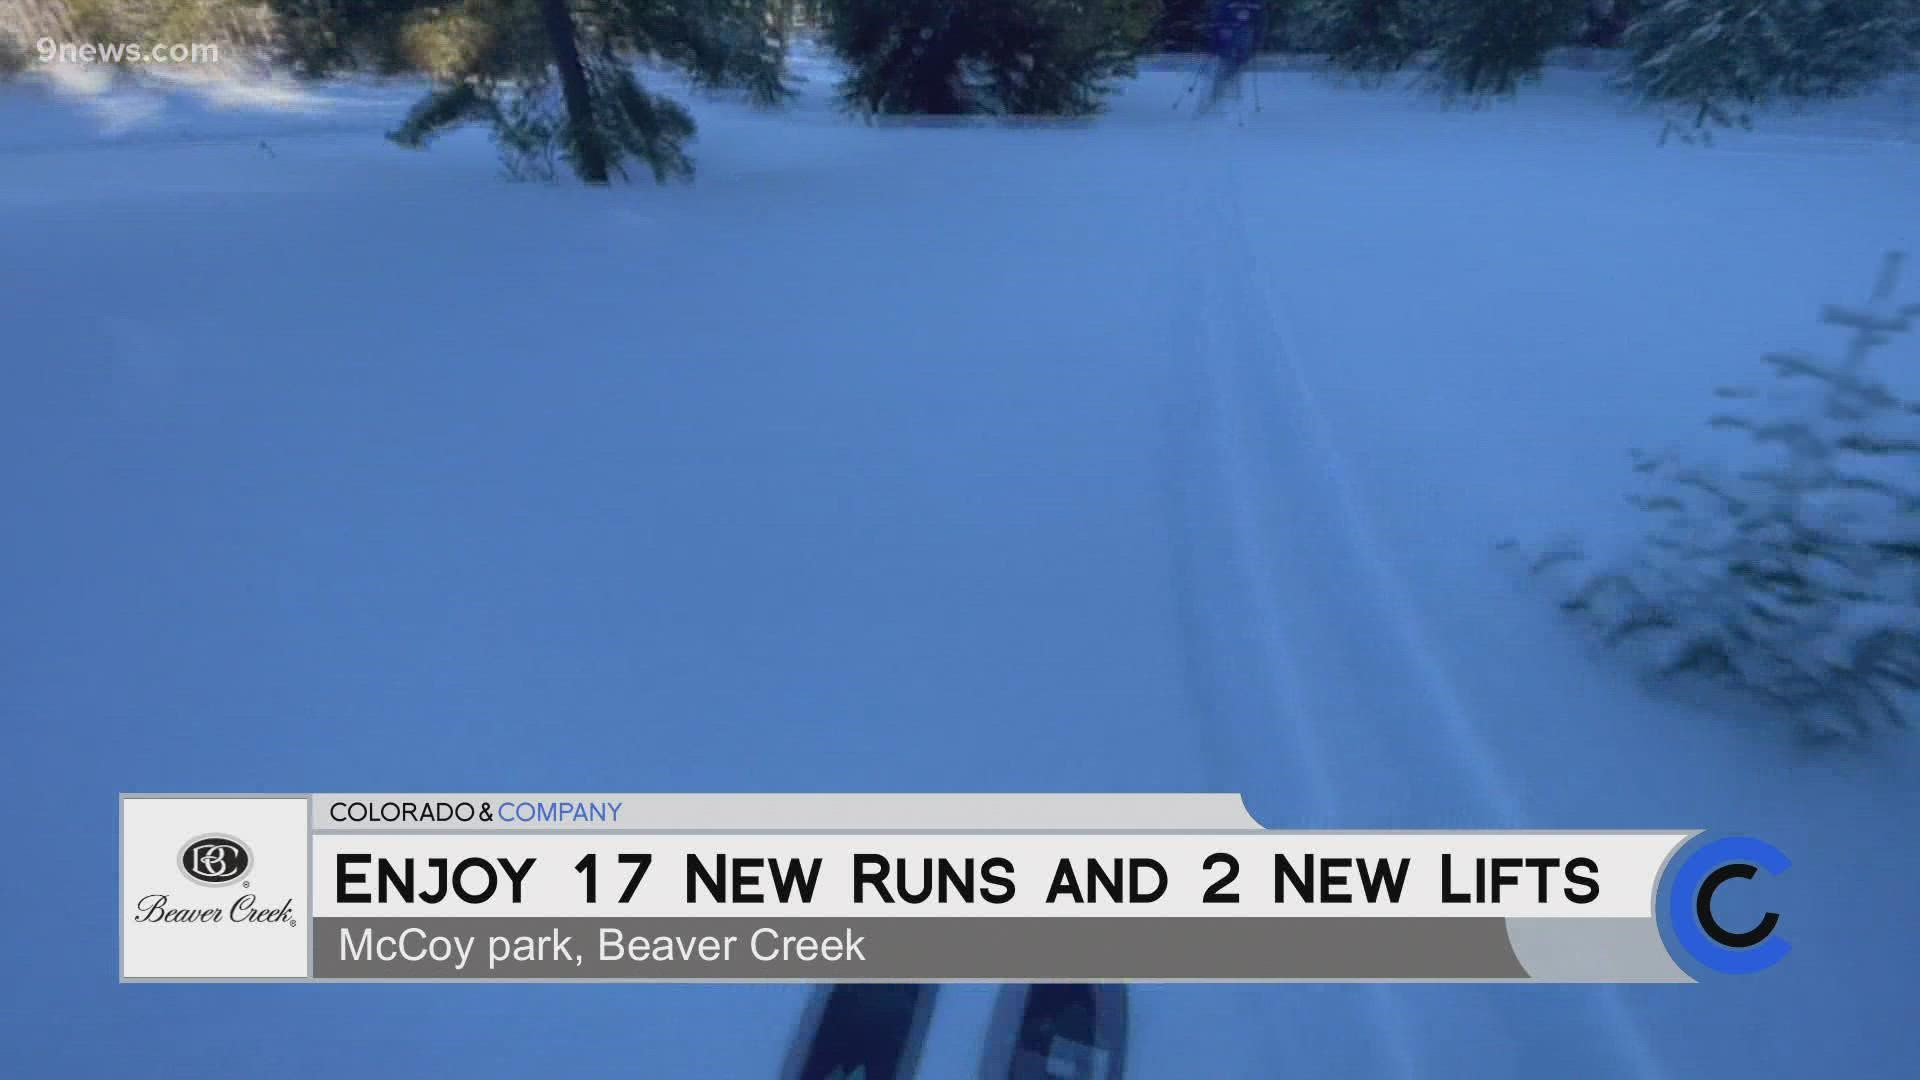 Learn more about the 17 new runs and new lifts at BeaverCreek.com.